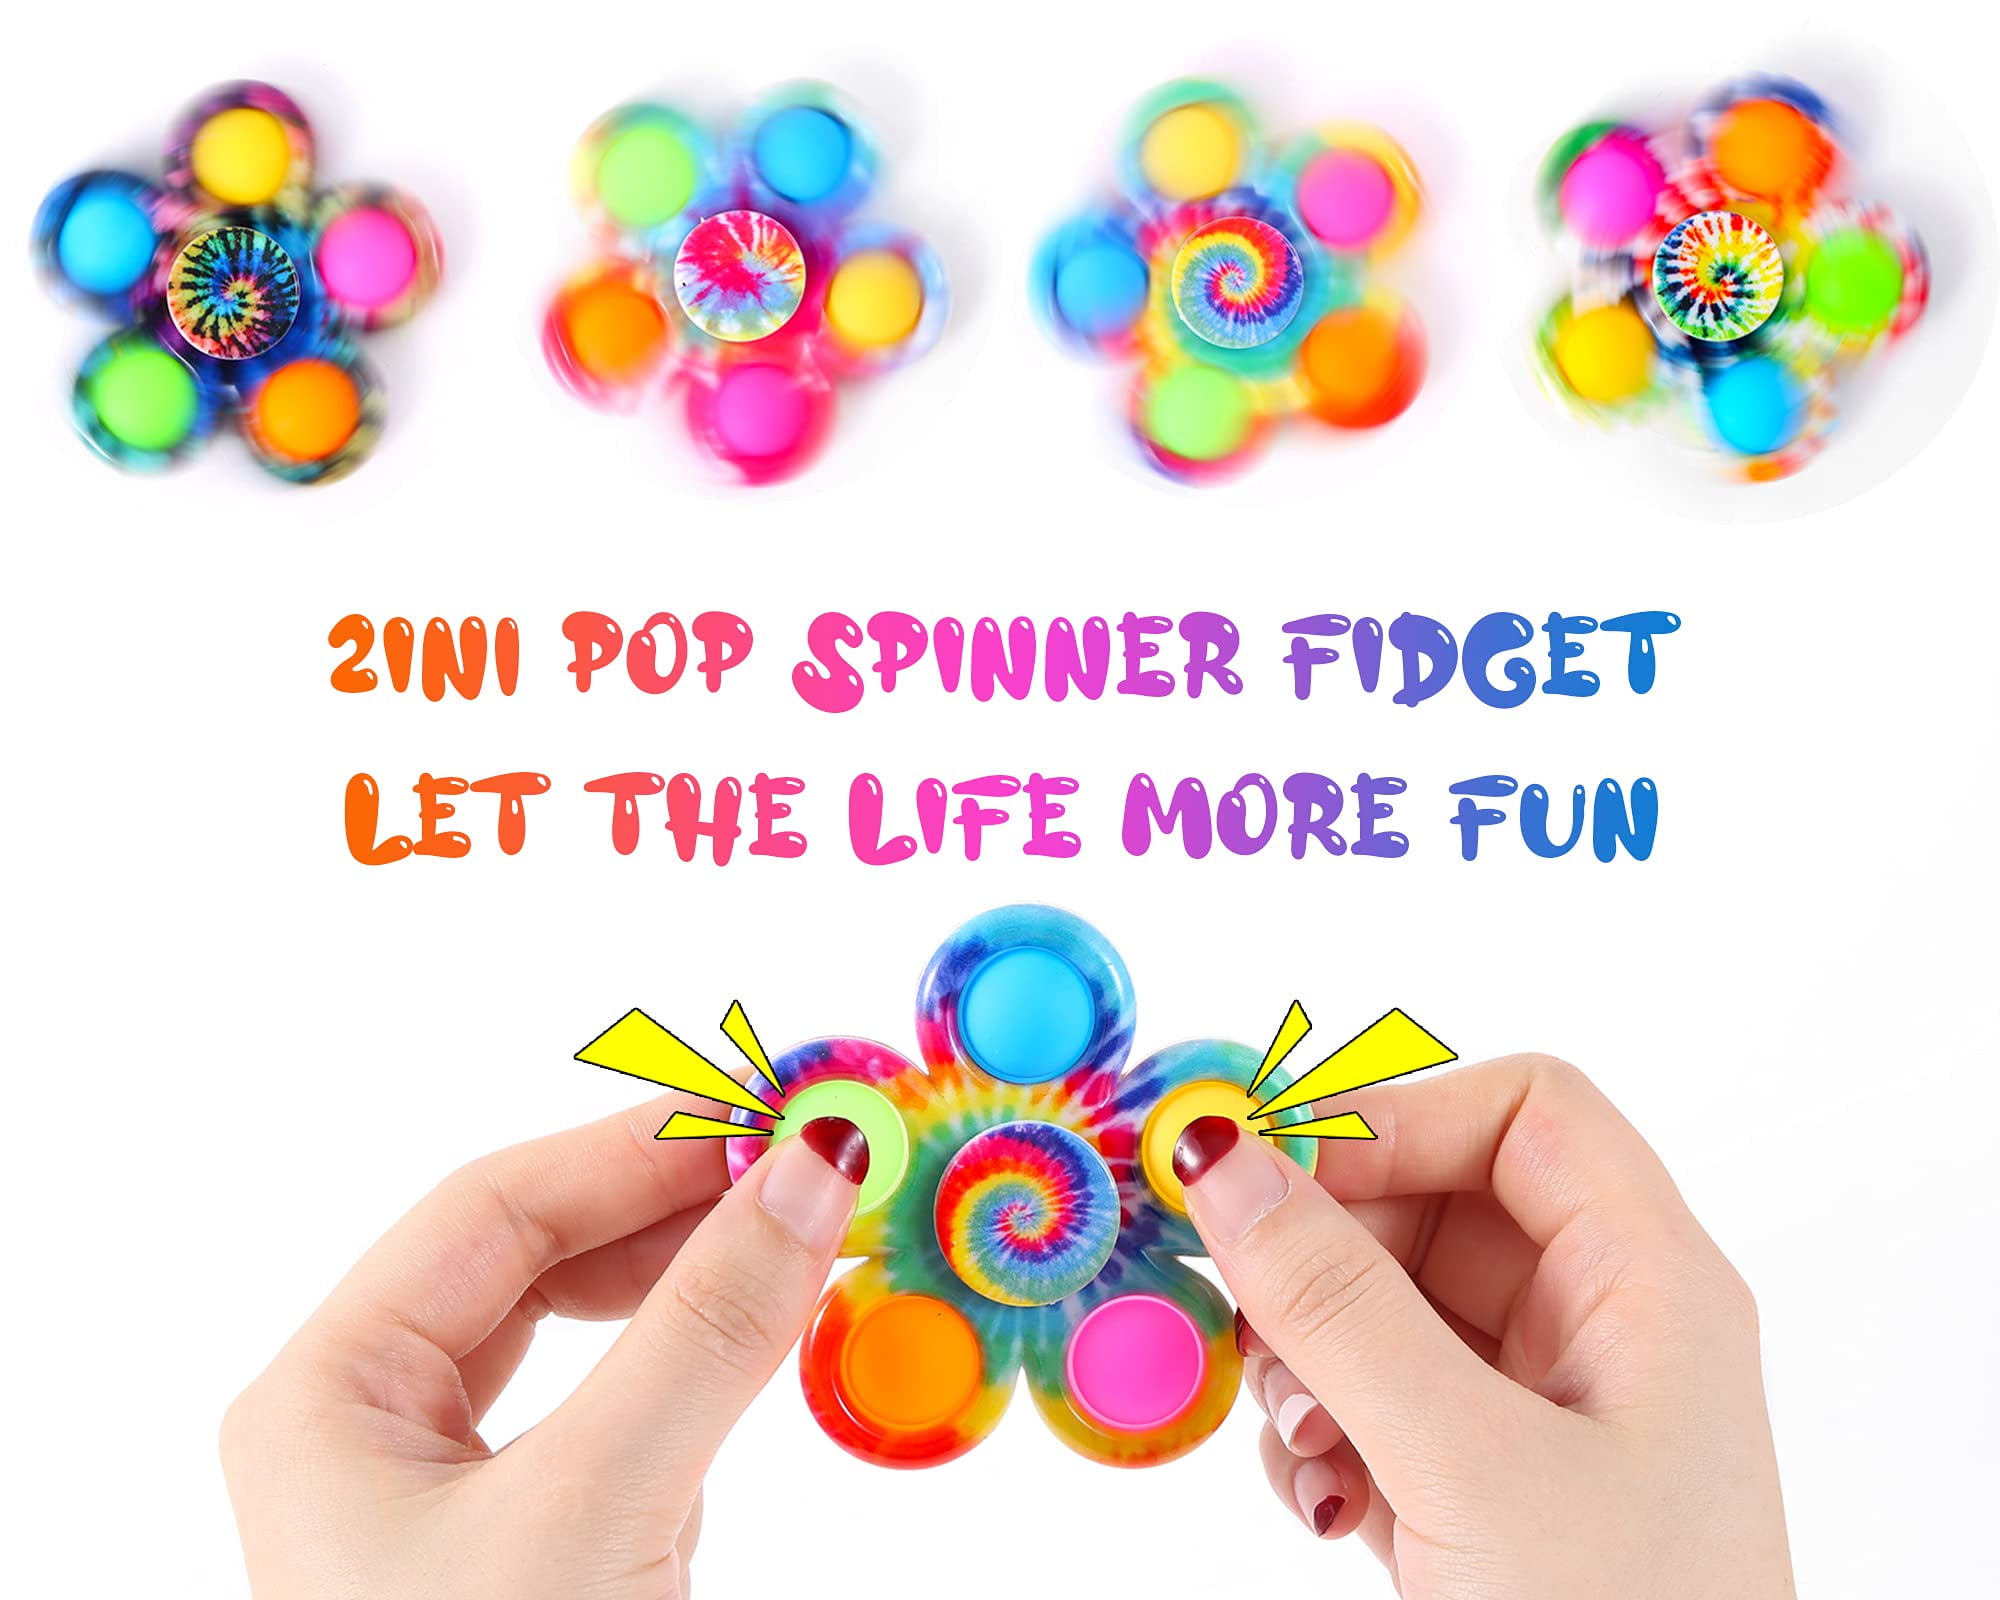 Anxiety GOHEYI Push-Pop-Bubbles Fidget Spinner Toy Push-Bubbles Fidget Toy for Kids Adult 4PCS 2 in 1 Pop-its Simple Dimple Spinner Toy Reducing Boredom ADHD 